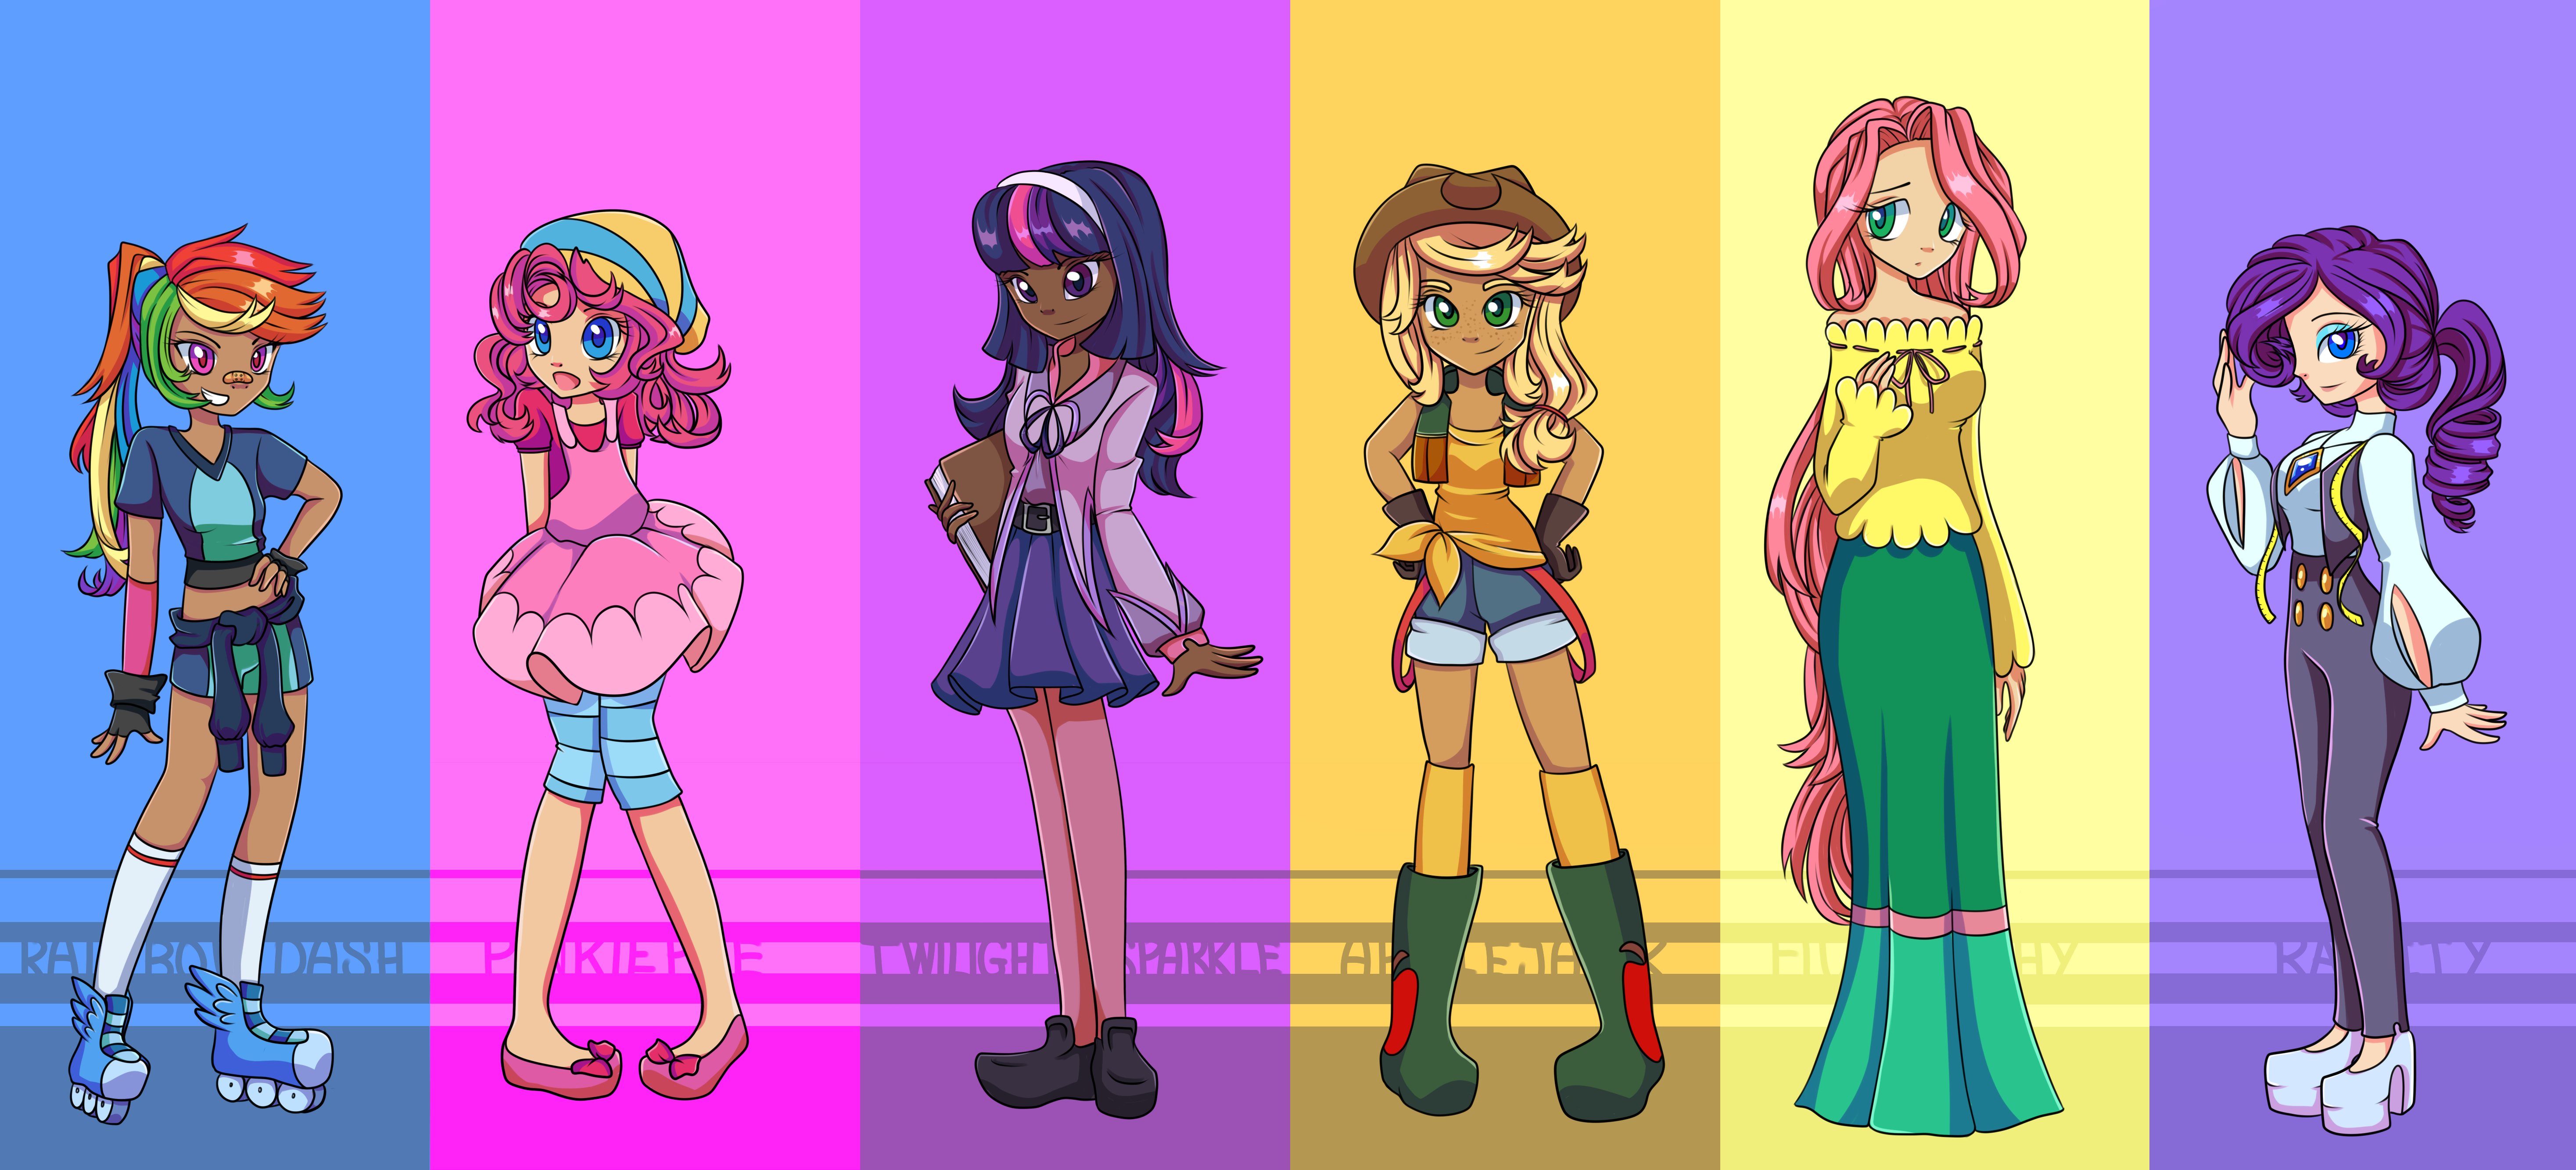 The mane six by LouiseLoo